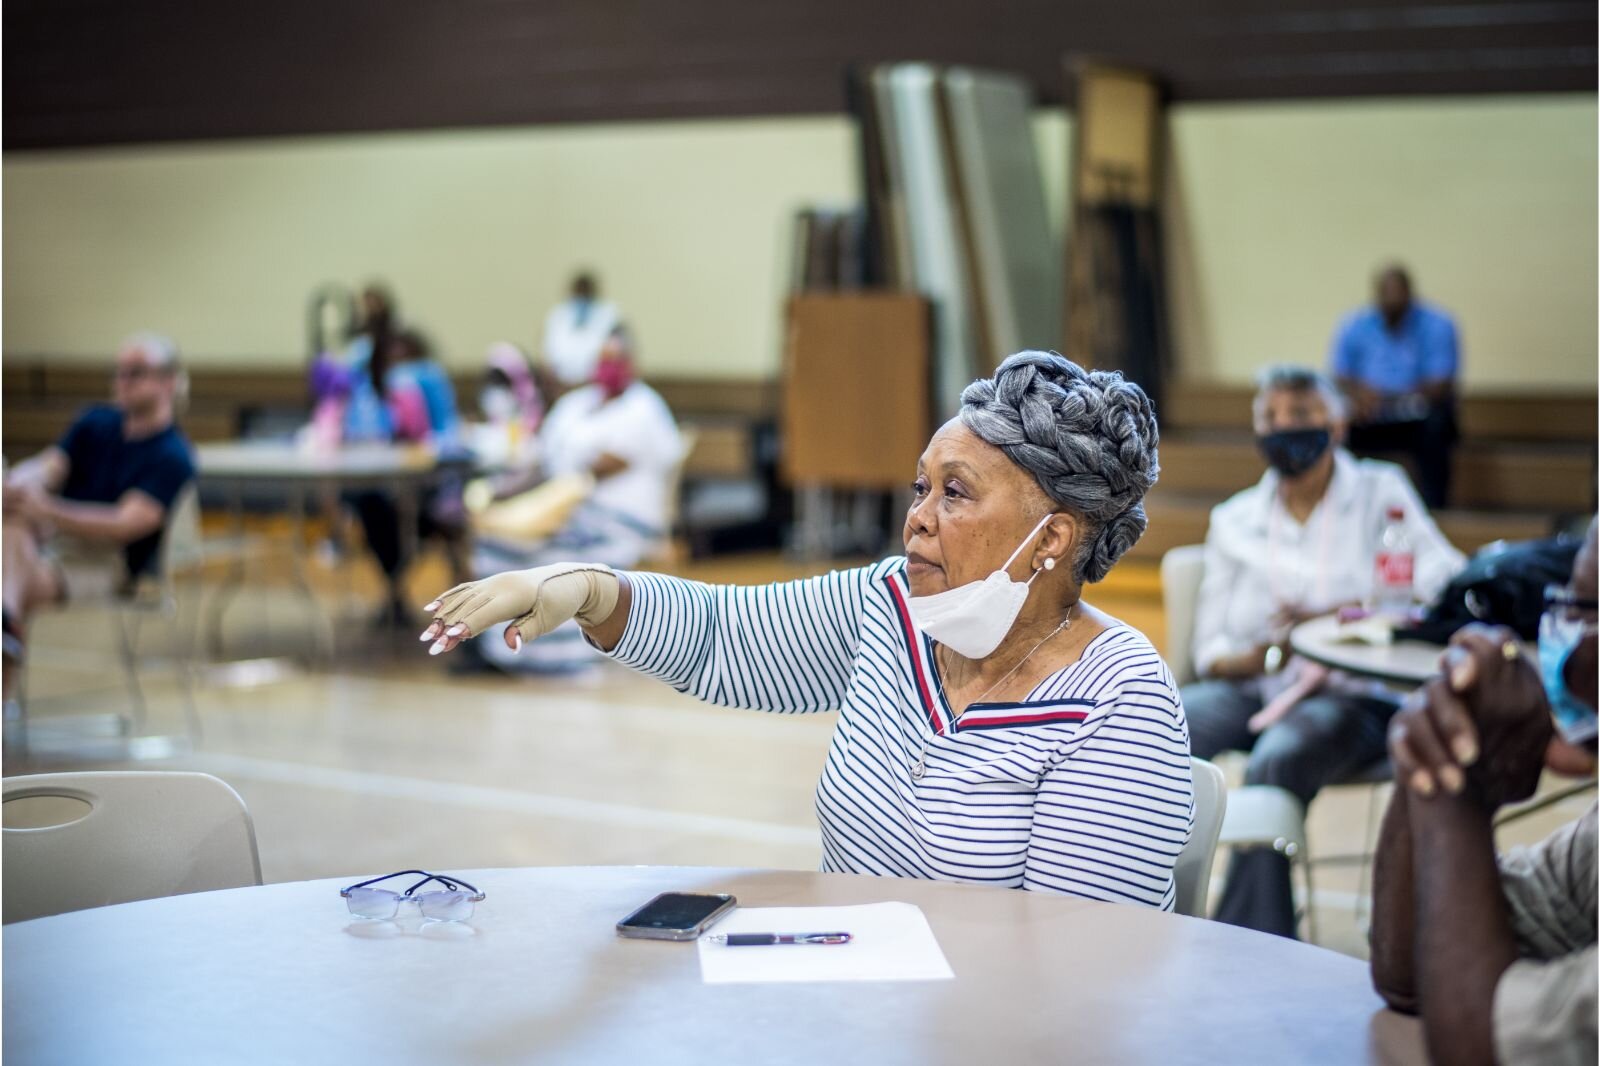 Seniors ask questions about plans for an affordable senior housing complex during a Thursday, July 21, 2022 charette, an idea-sharing community workshop.